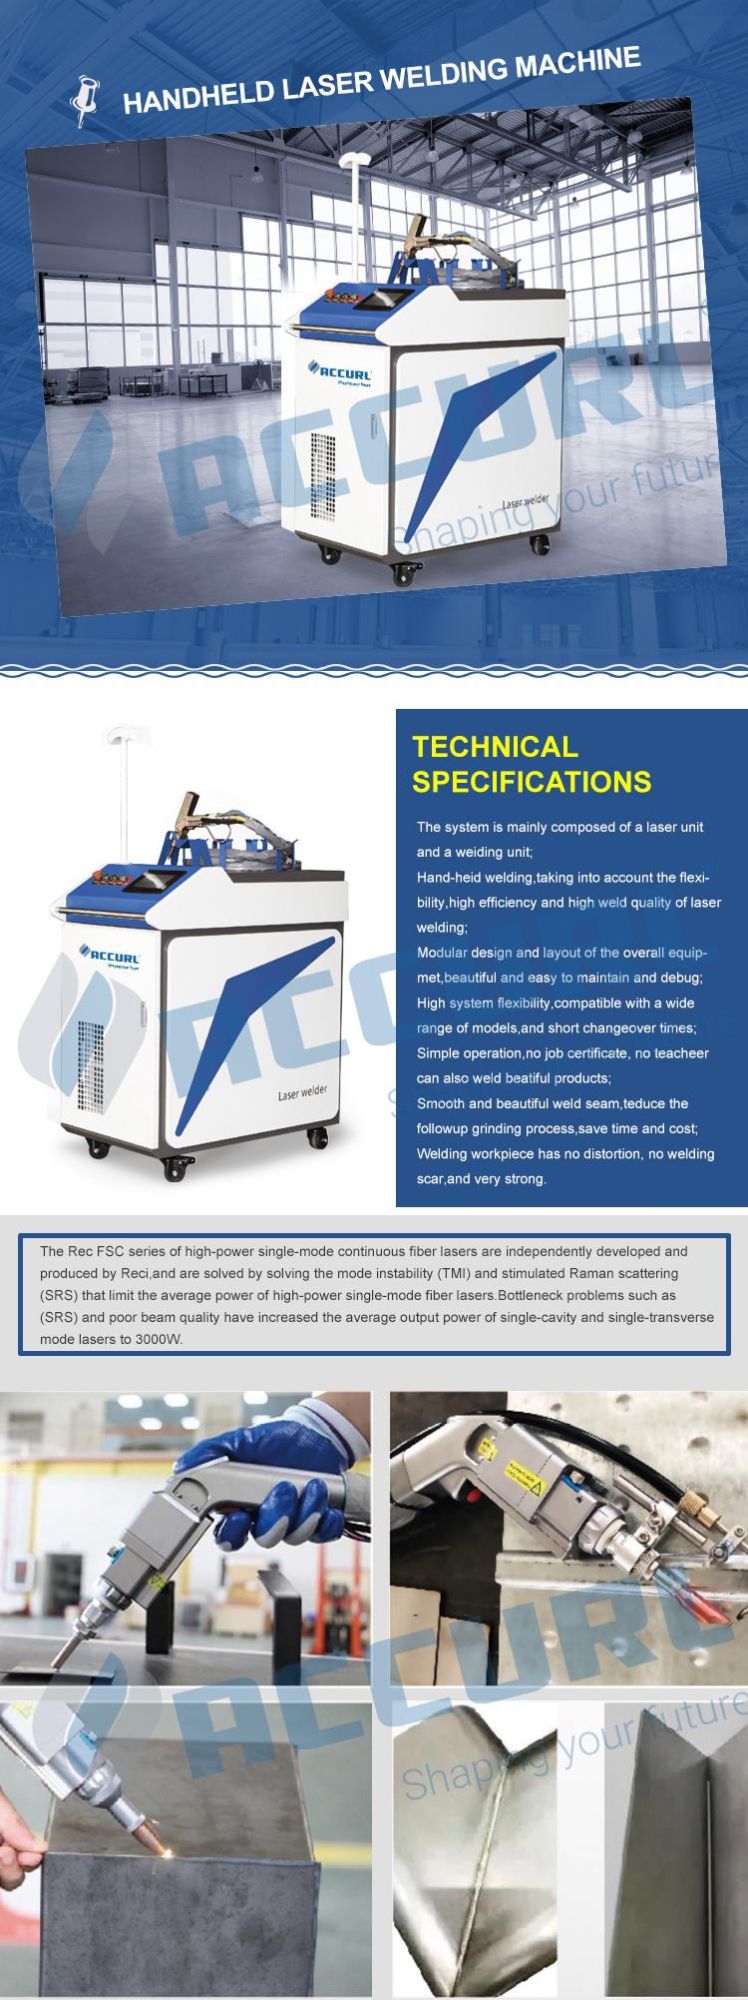 Accurl 2020 Hot Selling Handheld Portable Laser Welding Machine Price